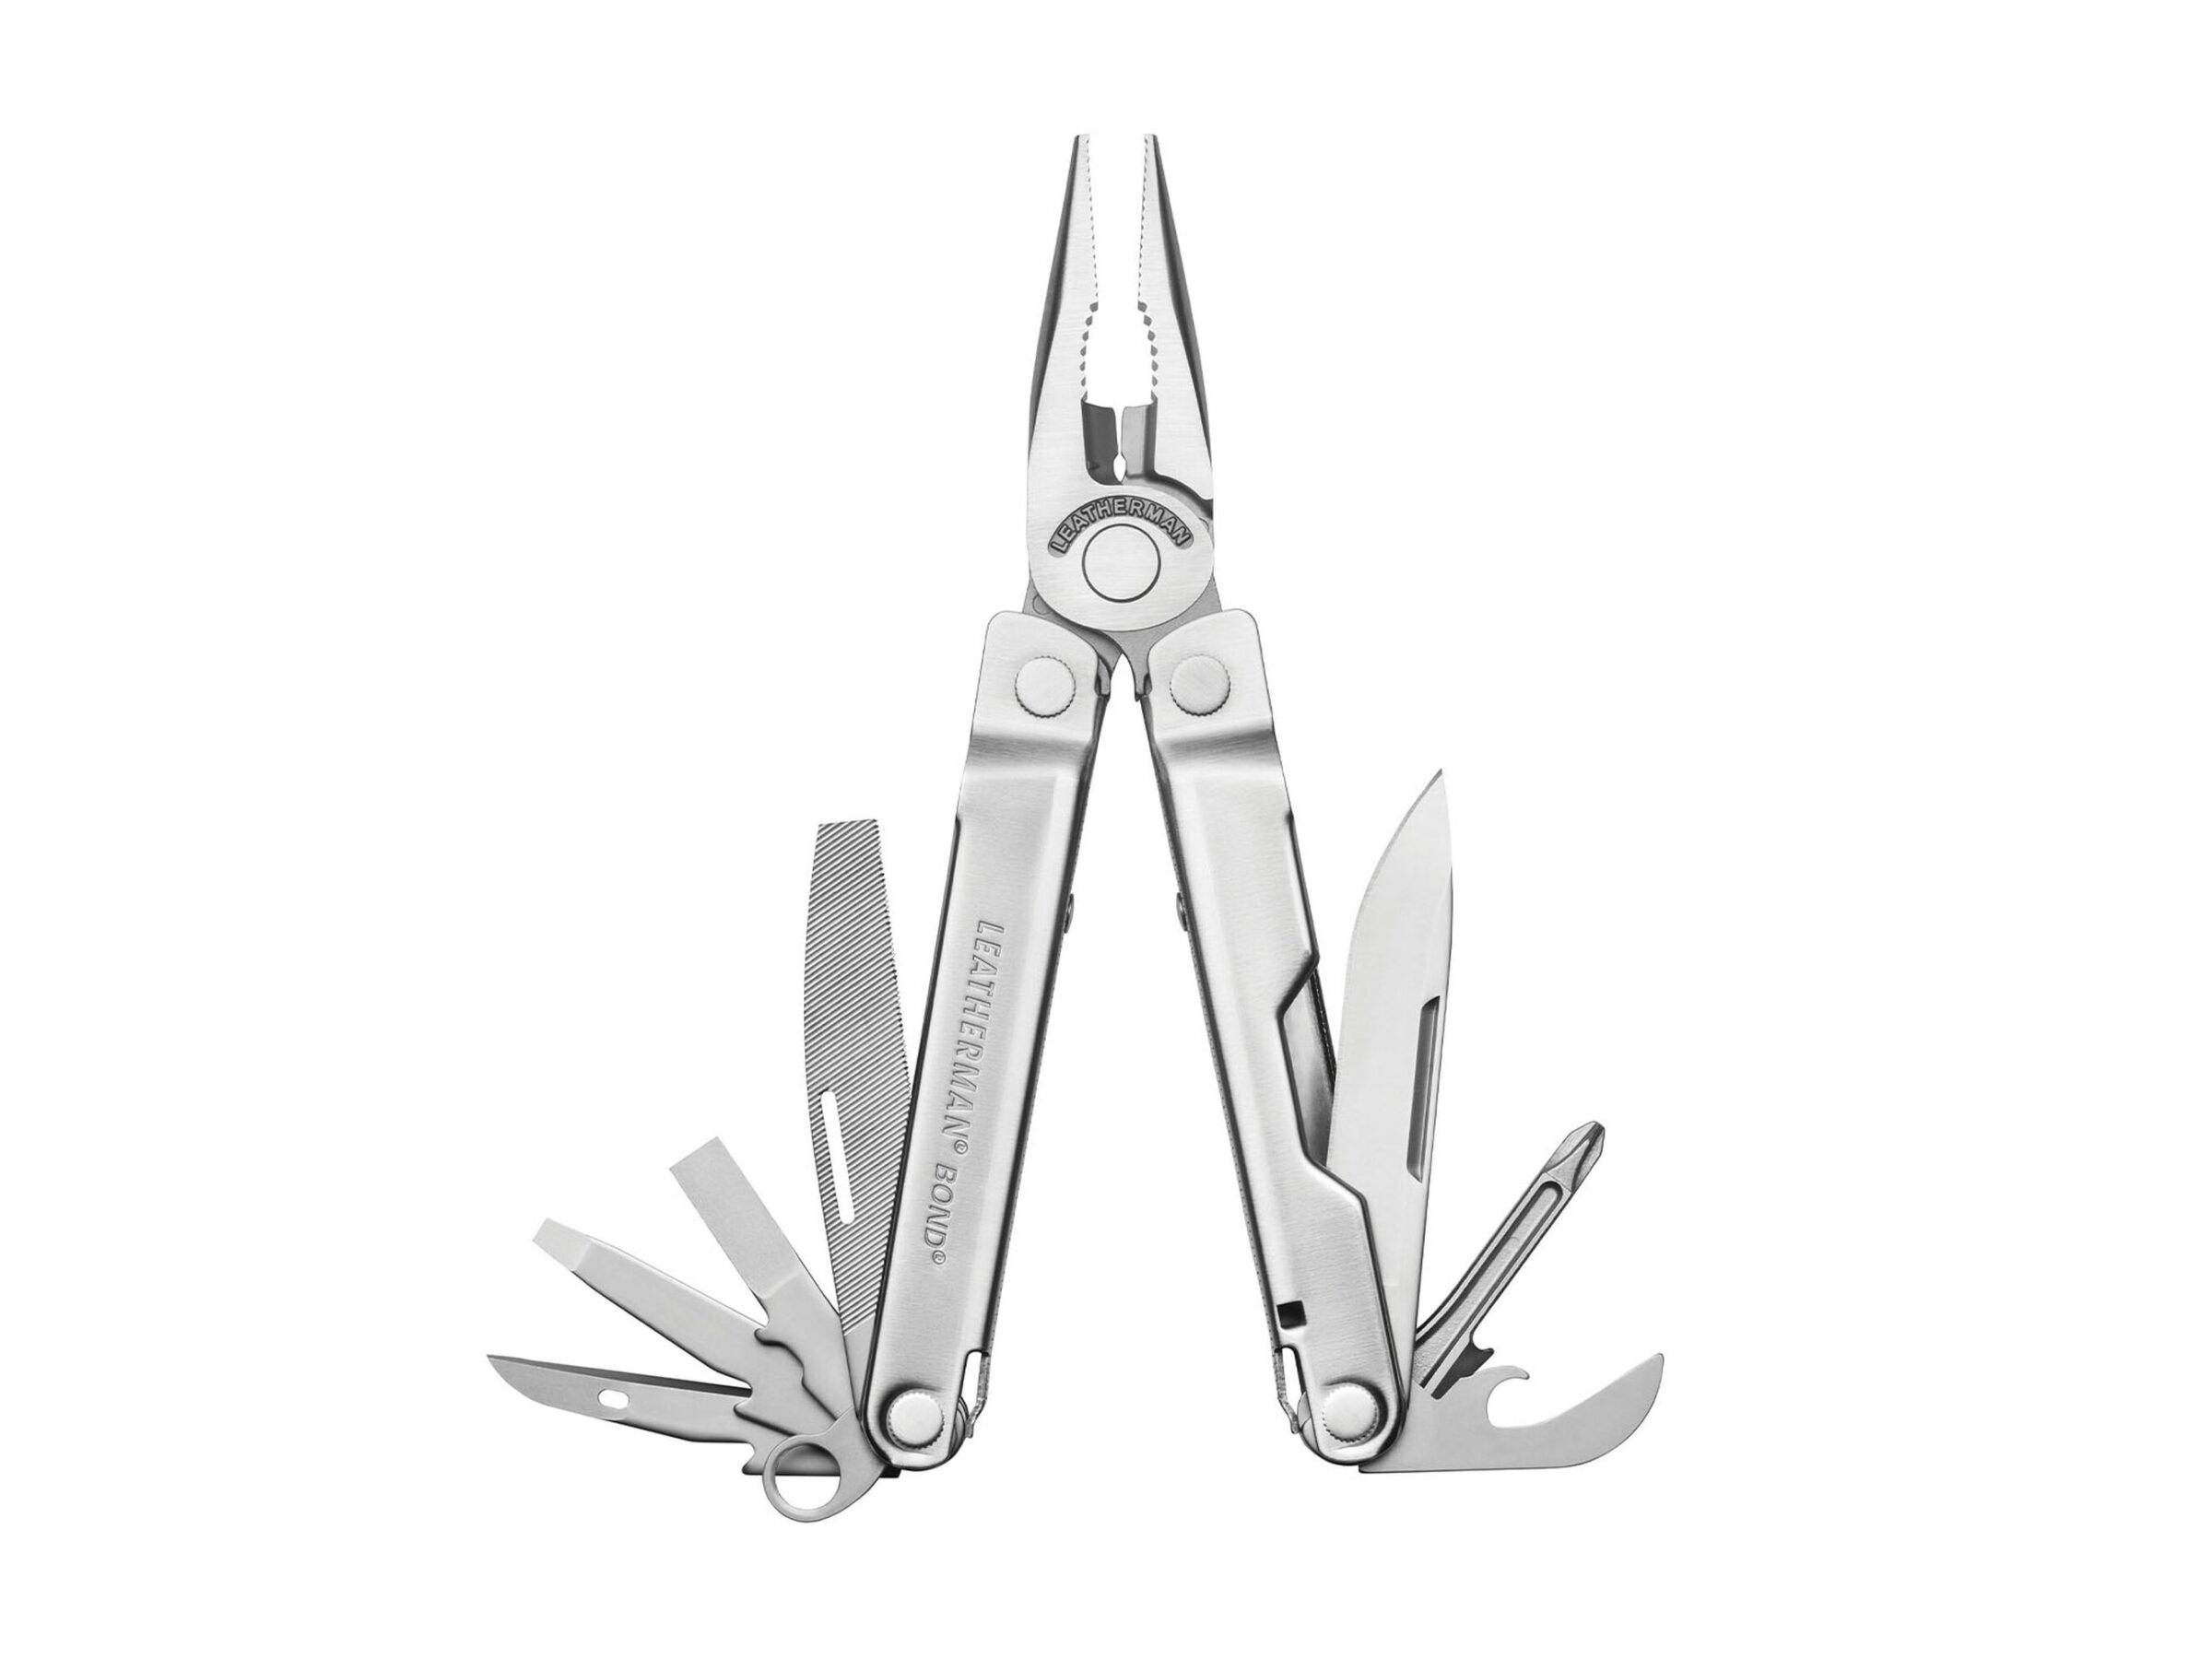 In Store Only – Leatherman Bond